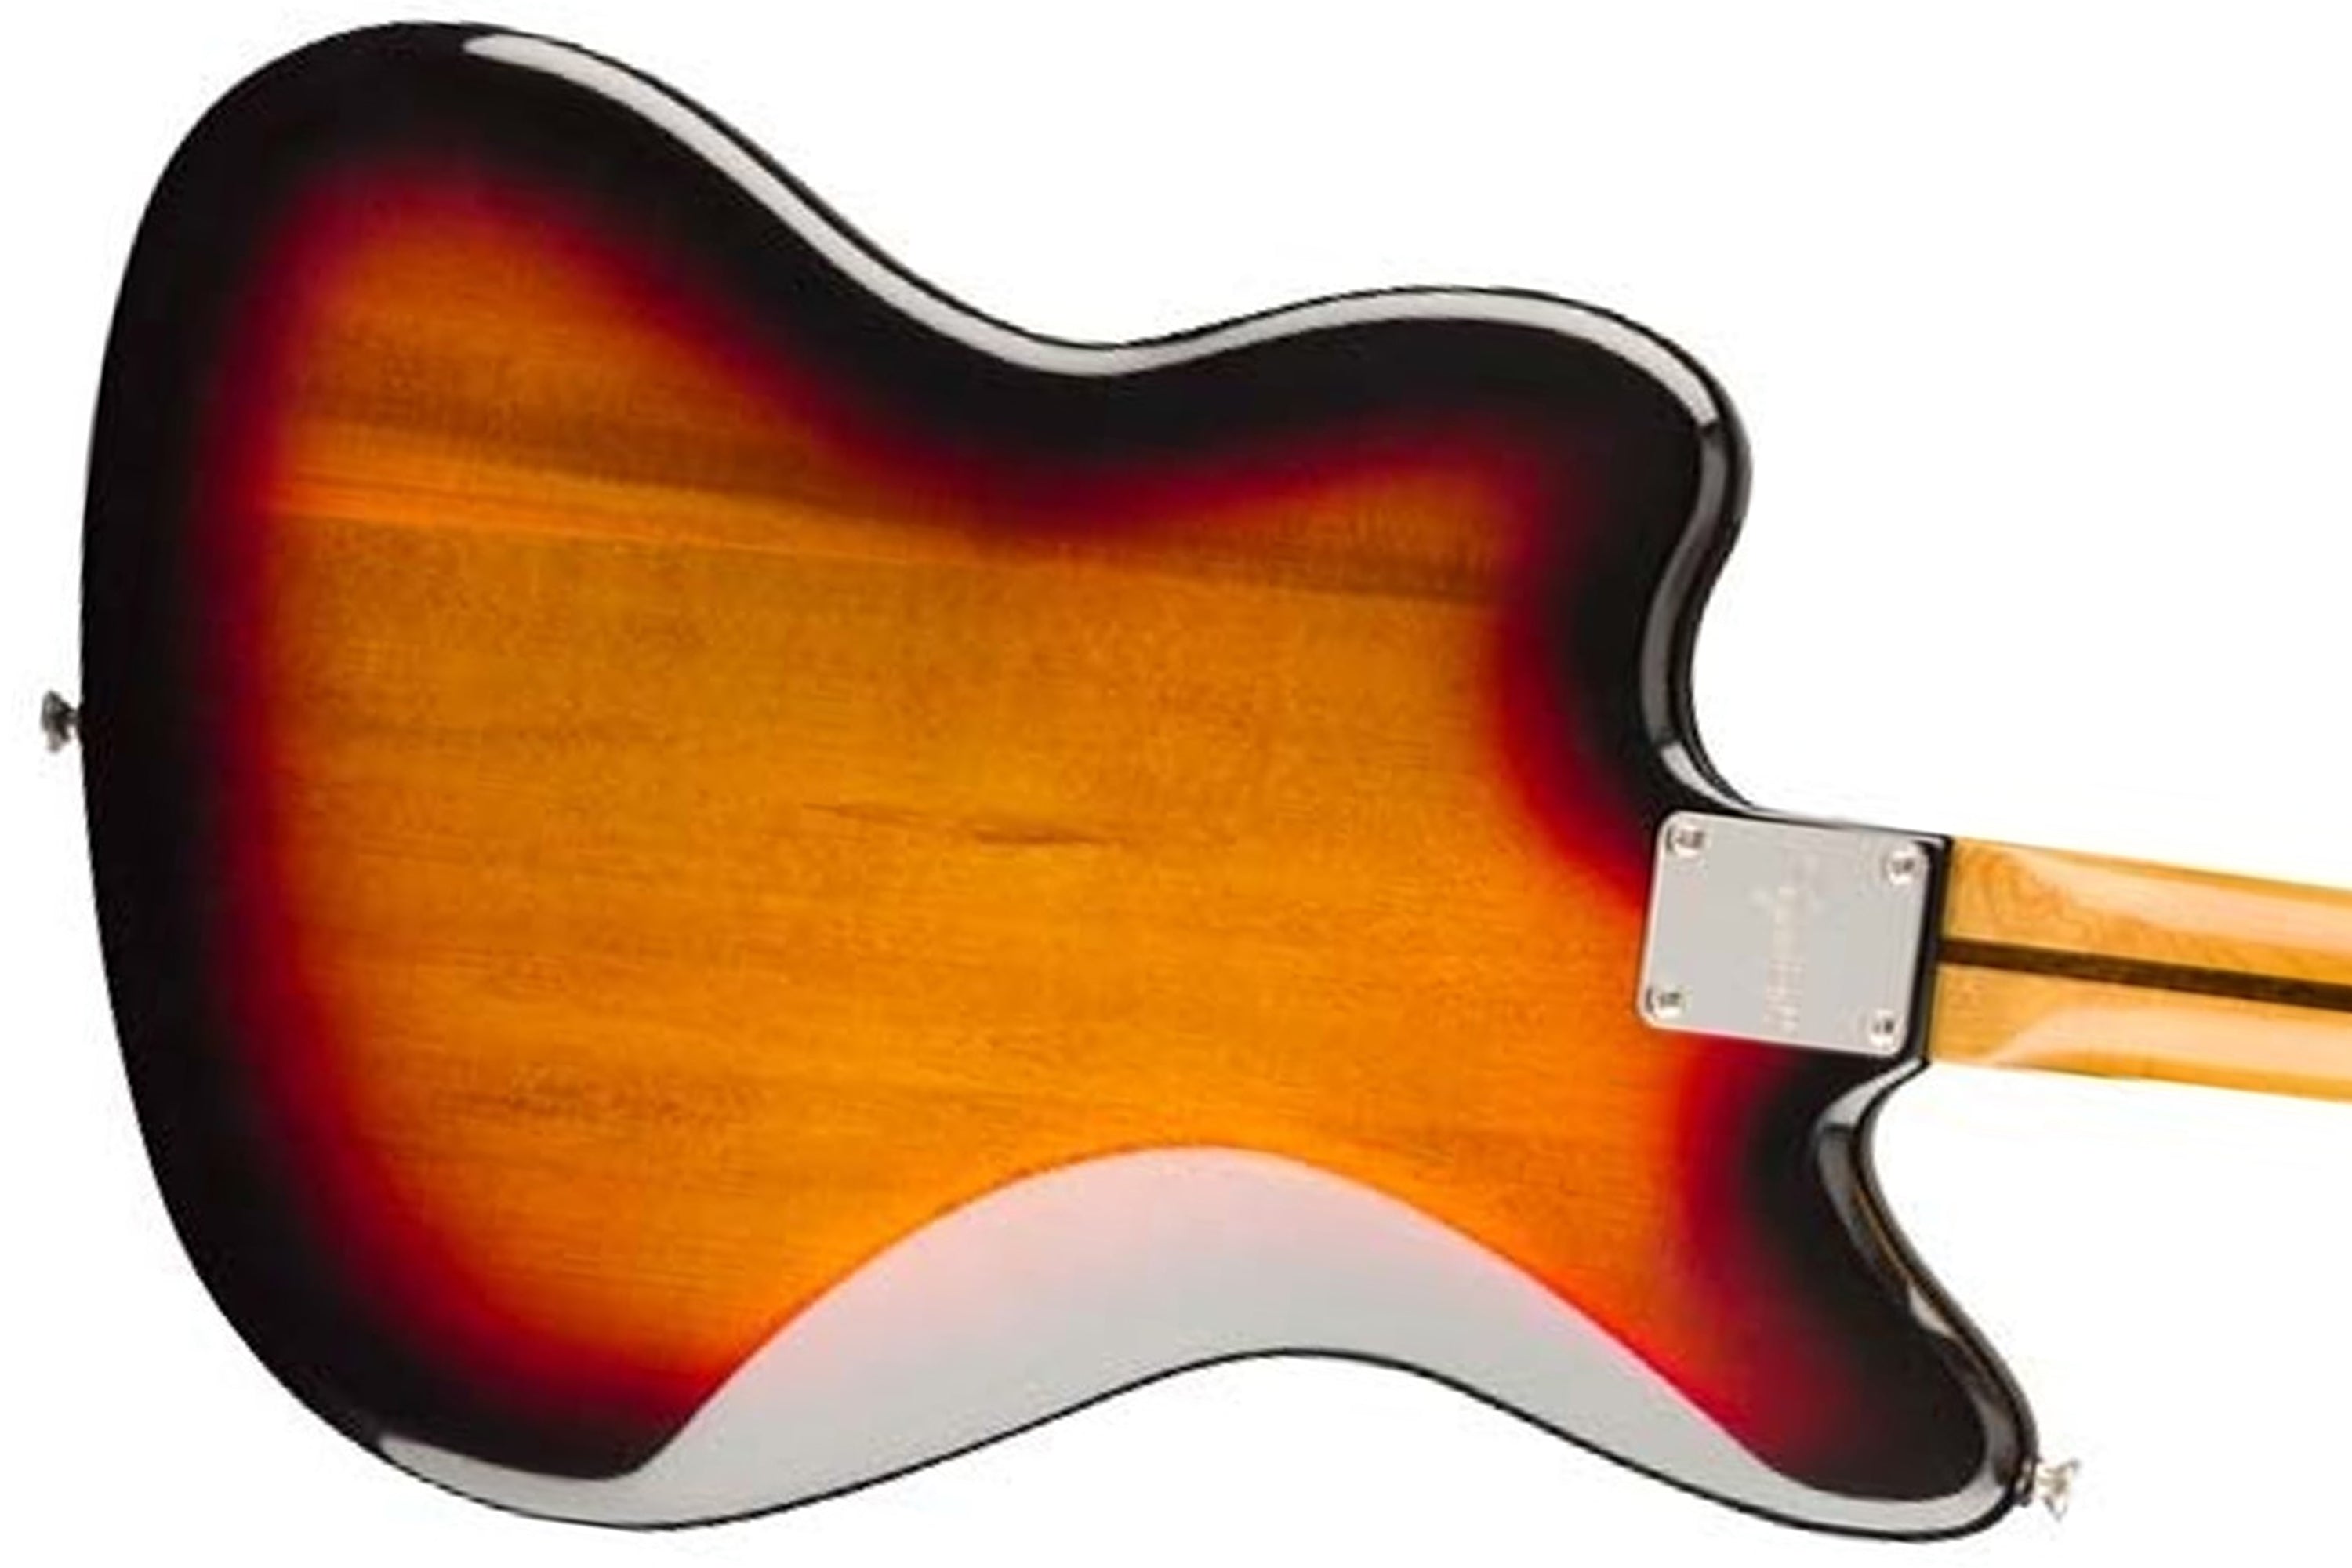 Squire By Fender Classic Vibe '60s Jazzmaster Guitar - 3-Color Sunburst